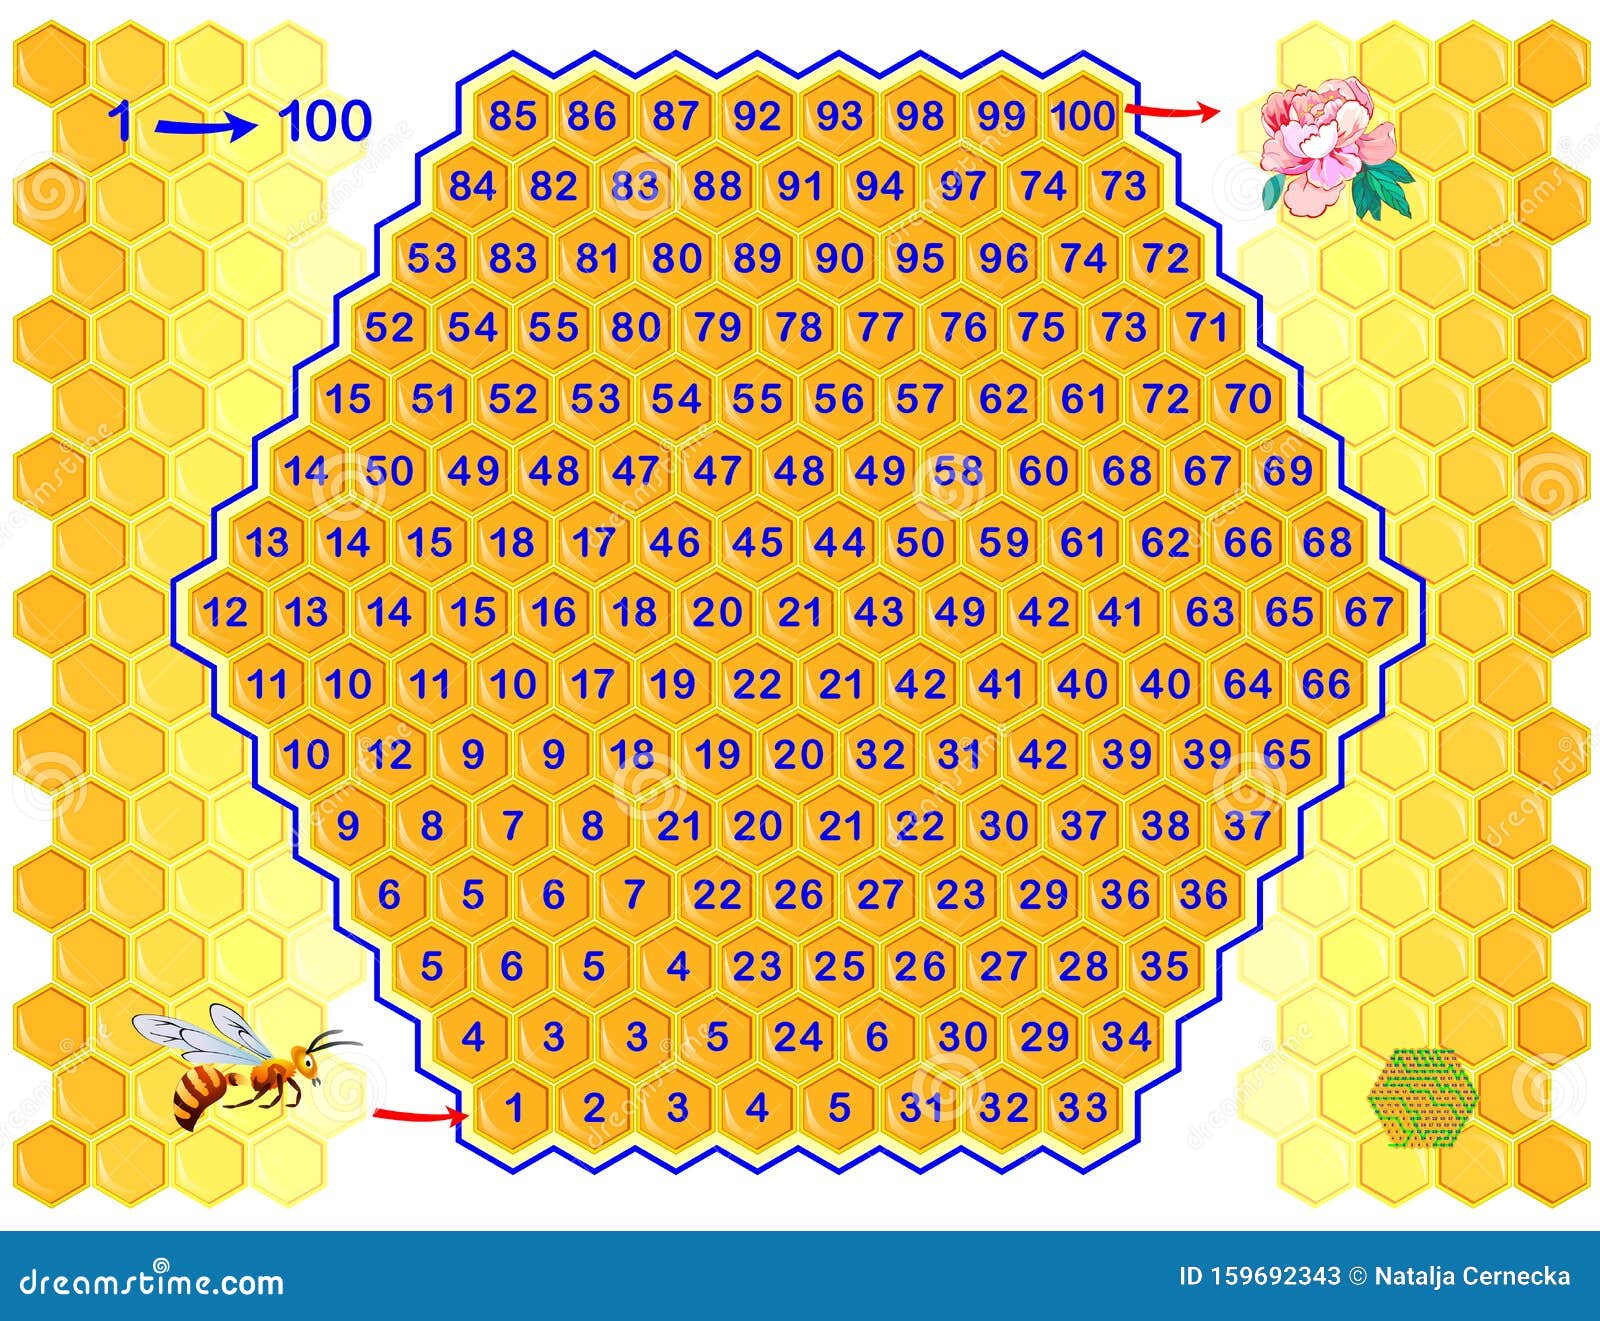 logical puzzle game with labyrinth for children and adults. find way from number 1 till 100.